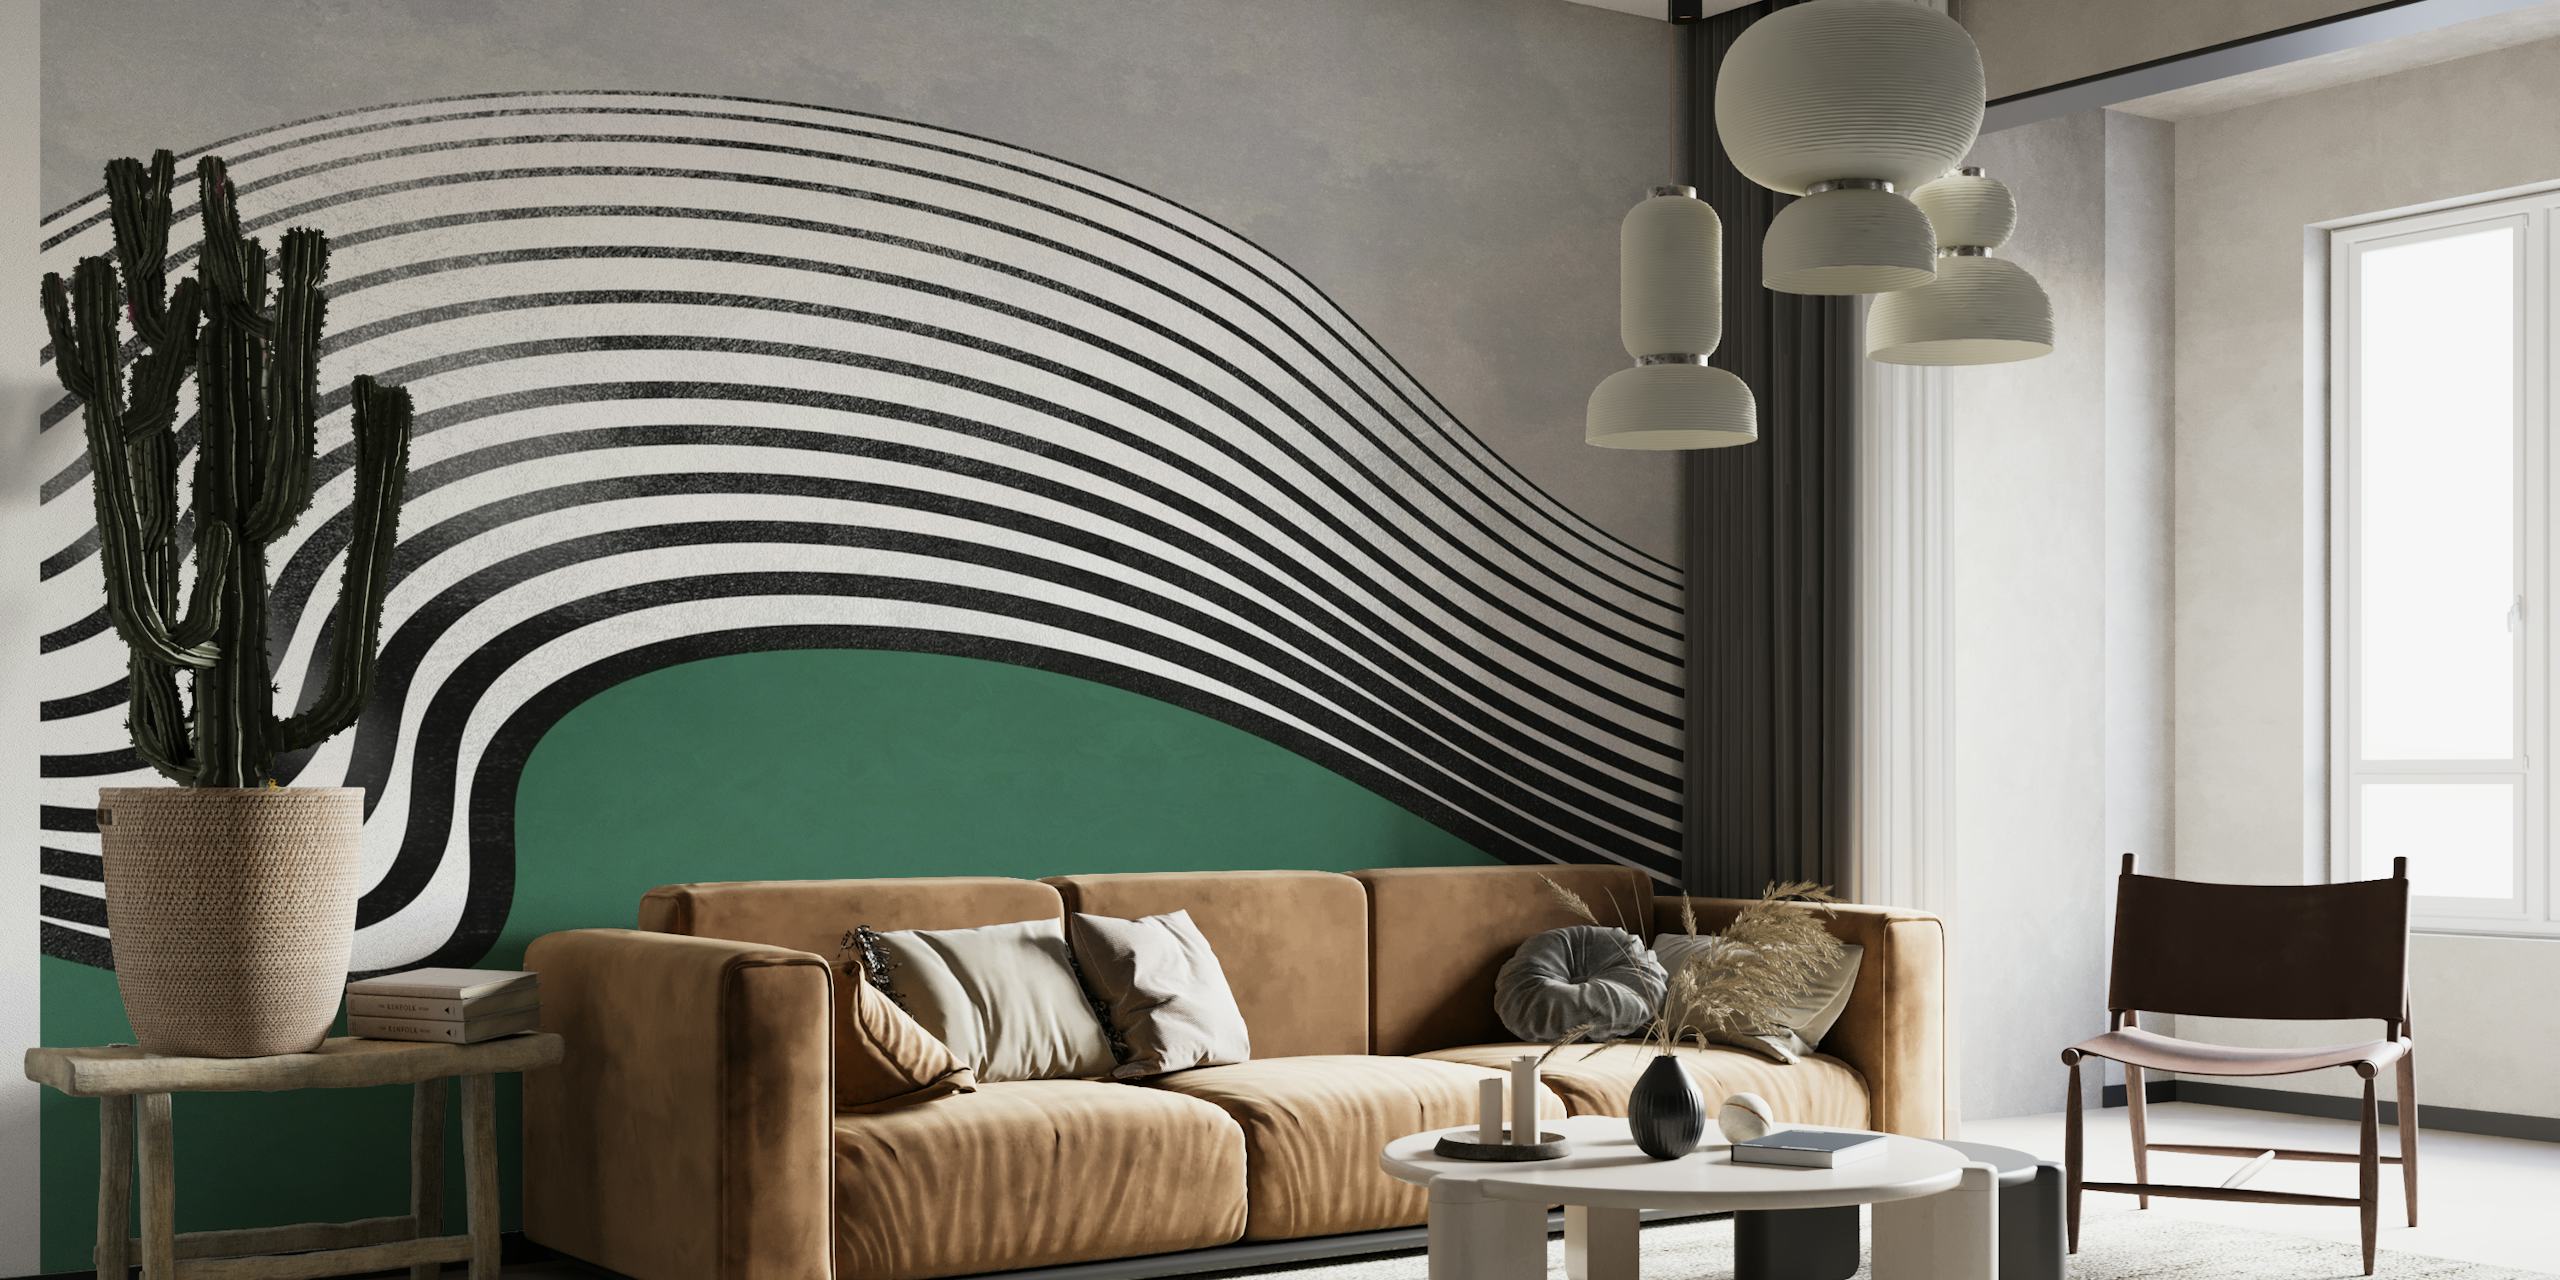 Abstract wave design with curving lines on green background for wall mural